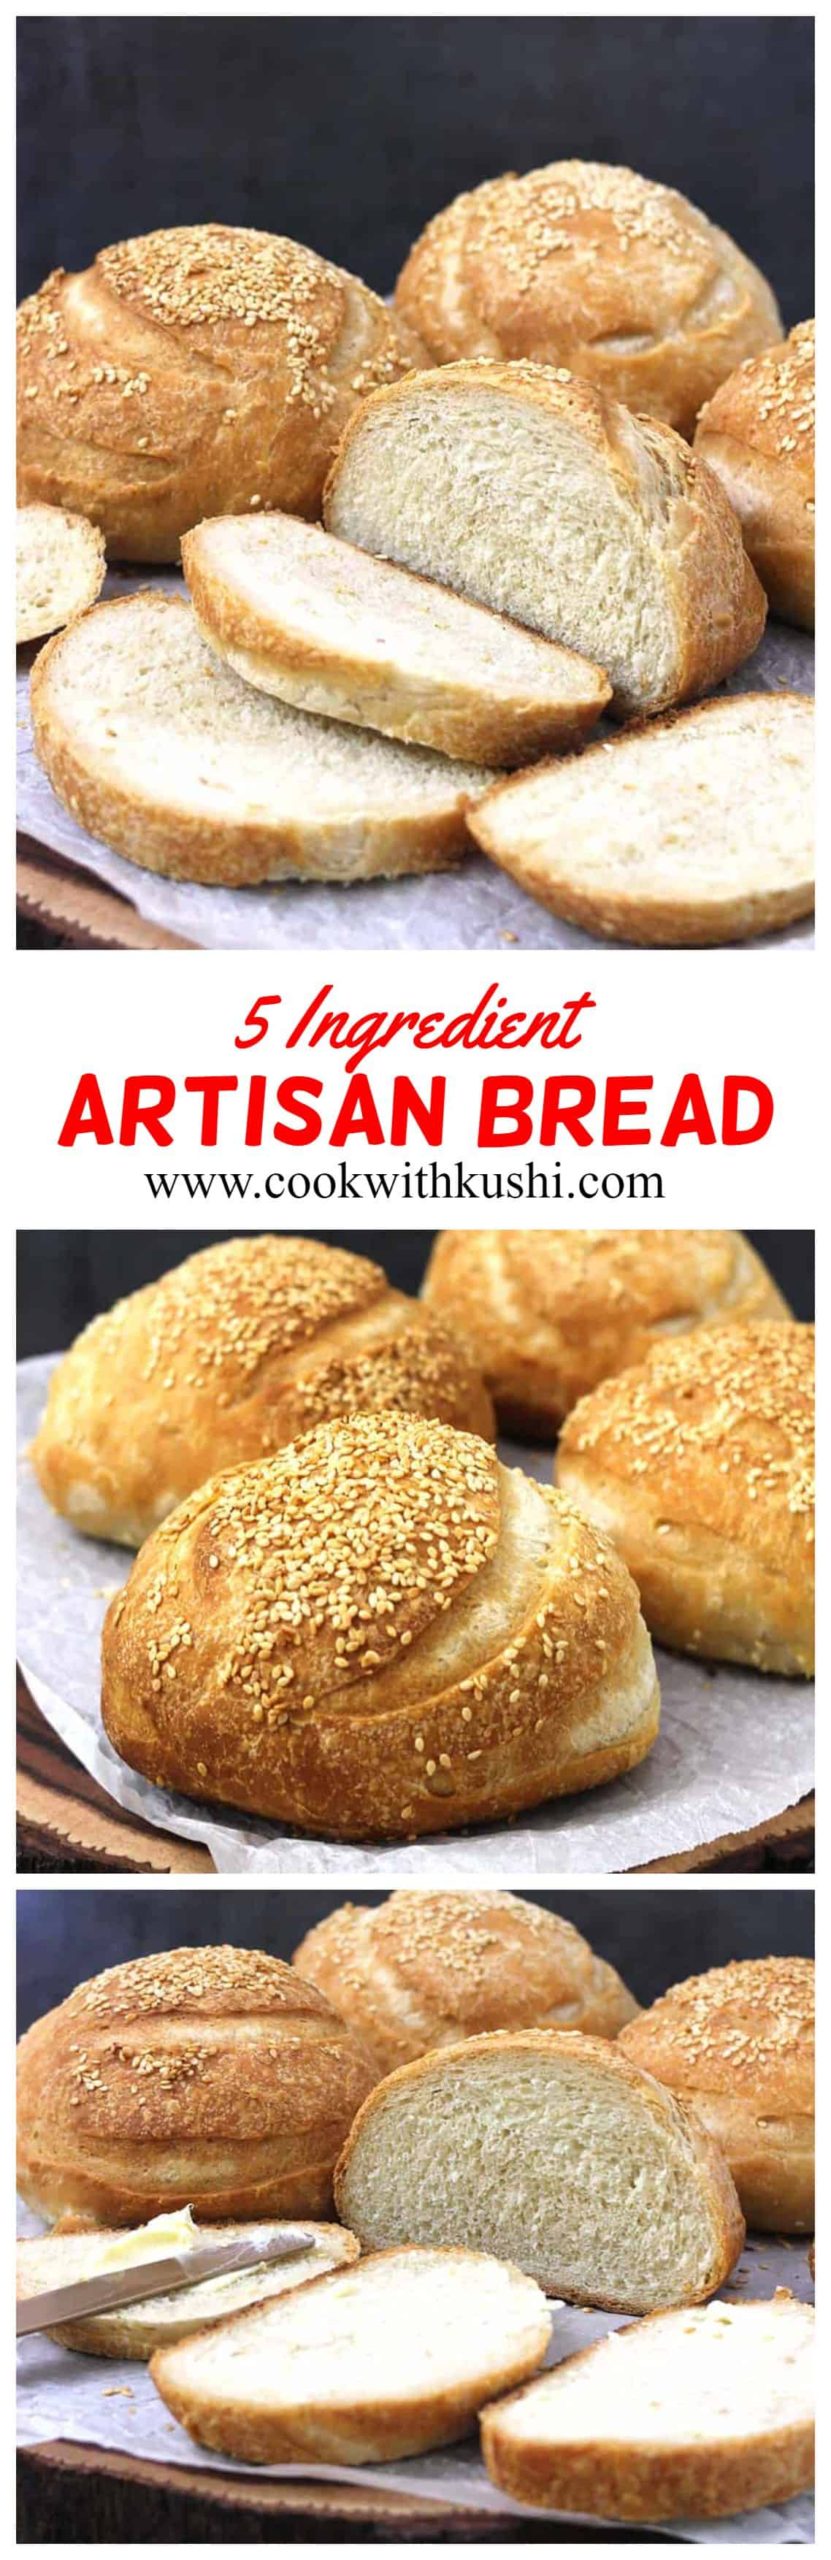 Artisan Bread easy to make bread recipe prepared using just 5 basic ingredients from your kitchen. This bread has light and crispy crust, soft texture on the inside. #artisanbreadrecipes  #homemadebreadrecipes #yeastbreadrecipes #bakingrecipes #5ingredientorlessrecipes